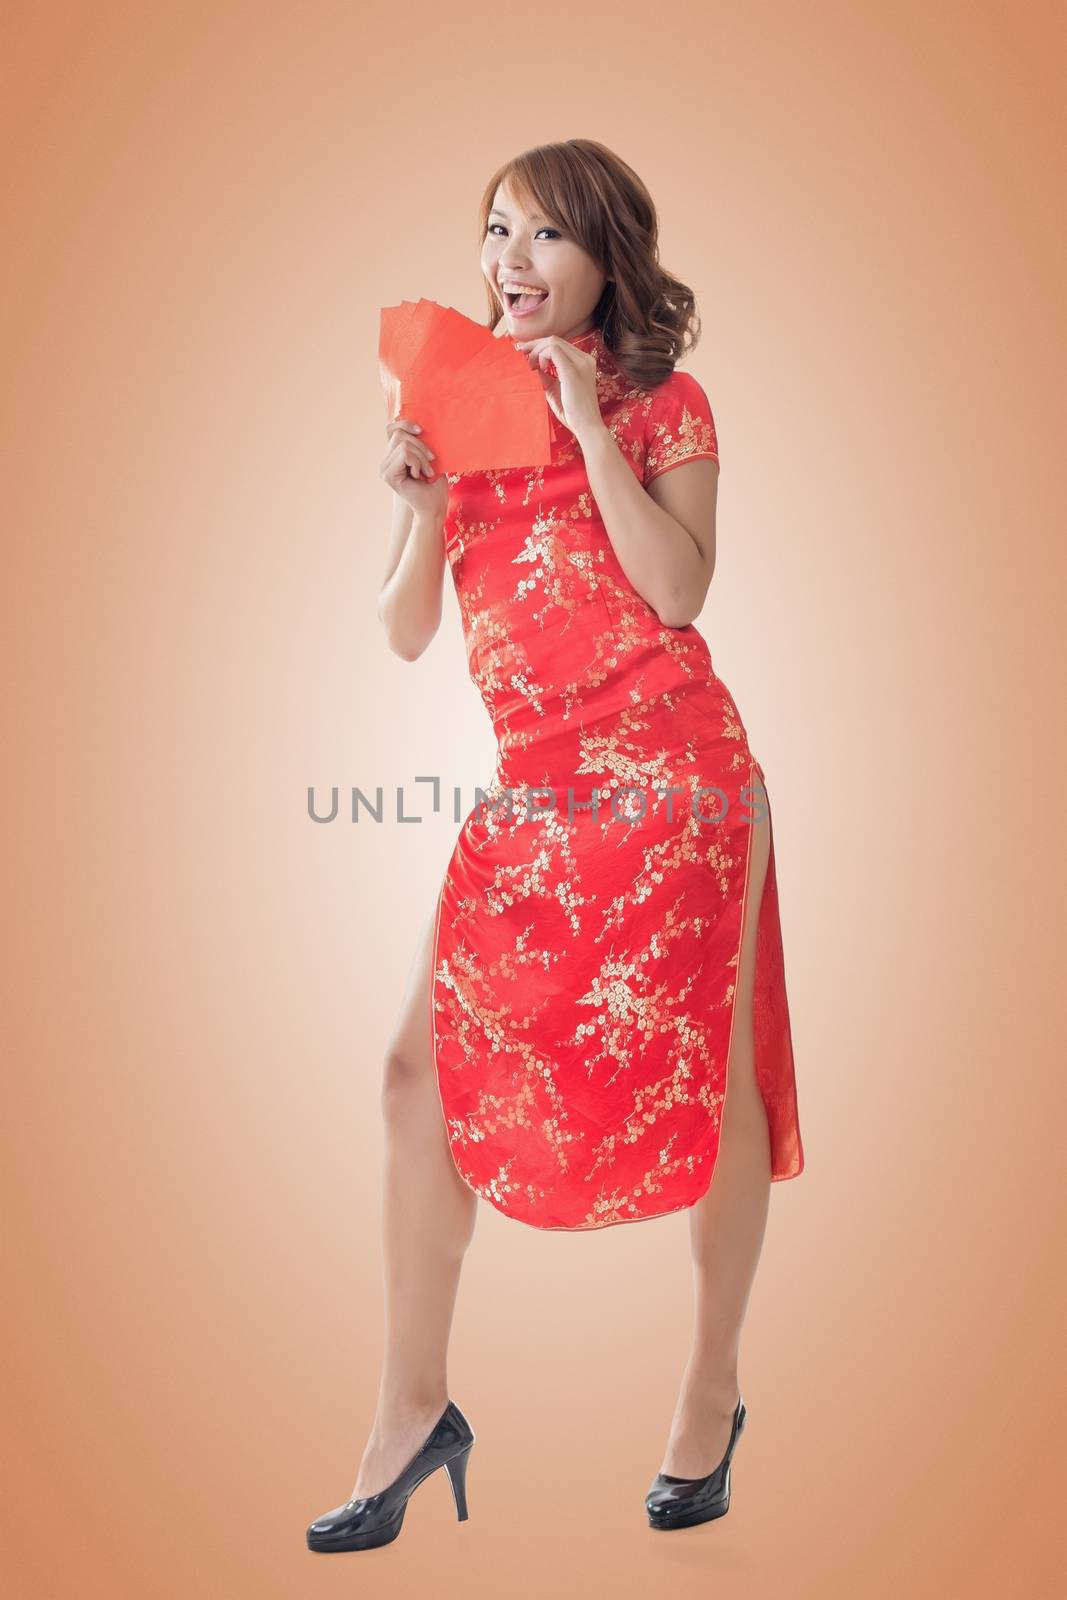 Chinese woman dress cheongsam and hold red envelope by elwynn